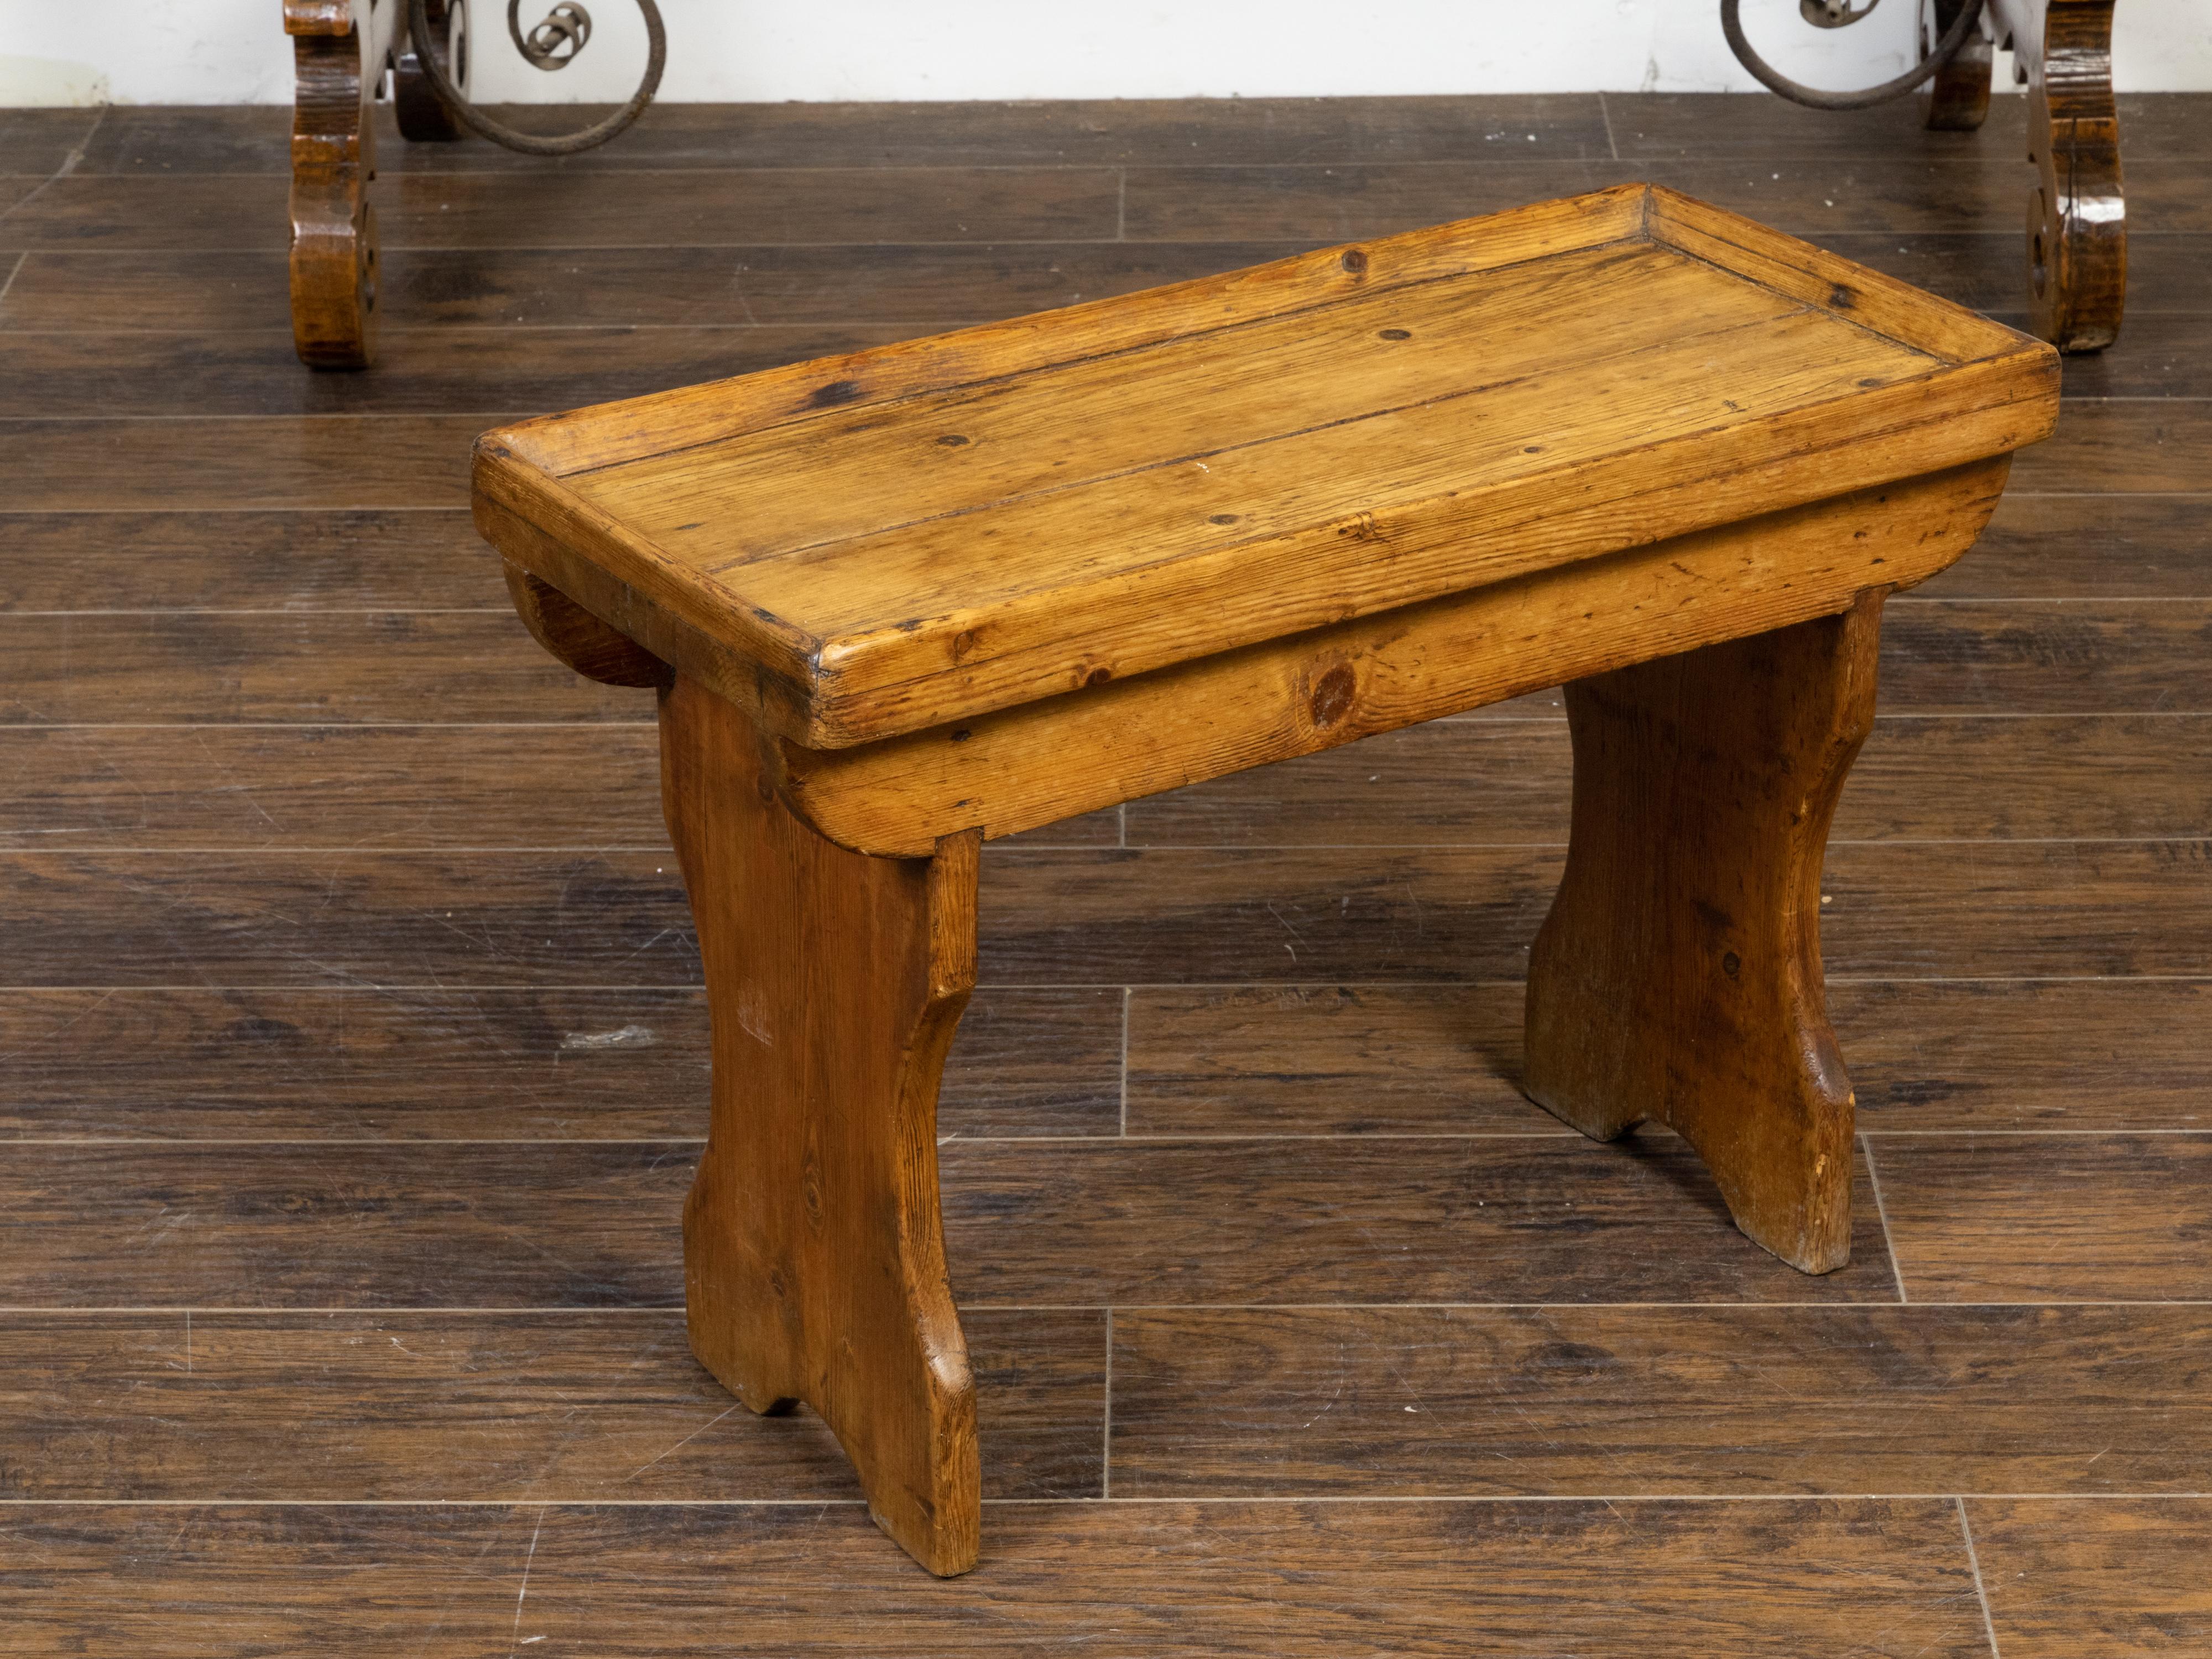 Rustic English Turn of the Century Pine Drinks Table with Tray Top and Carved Legs